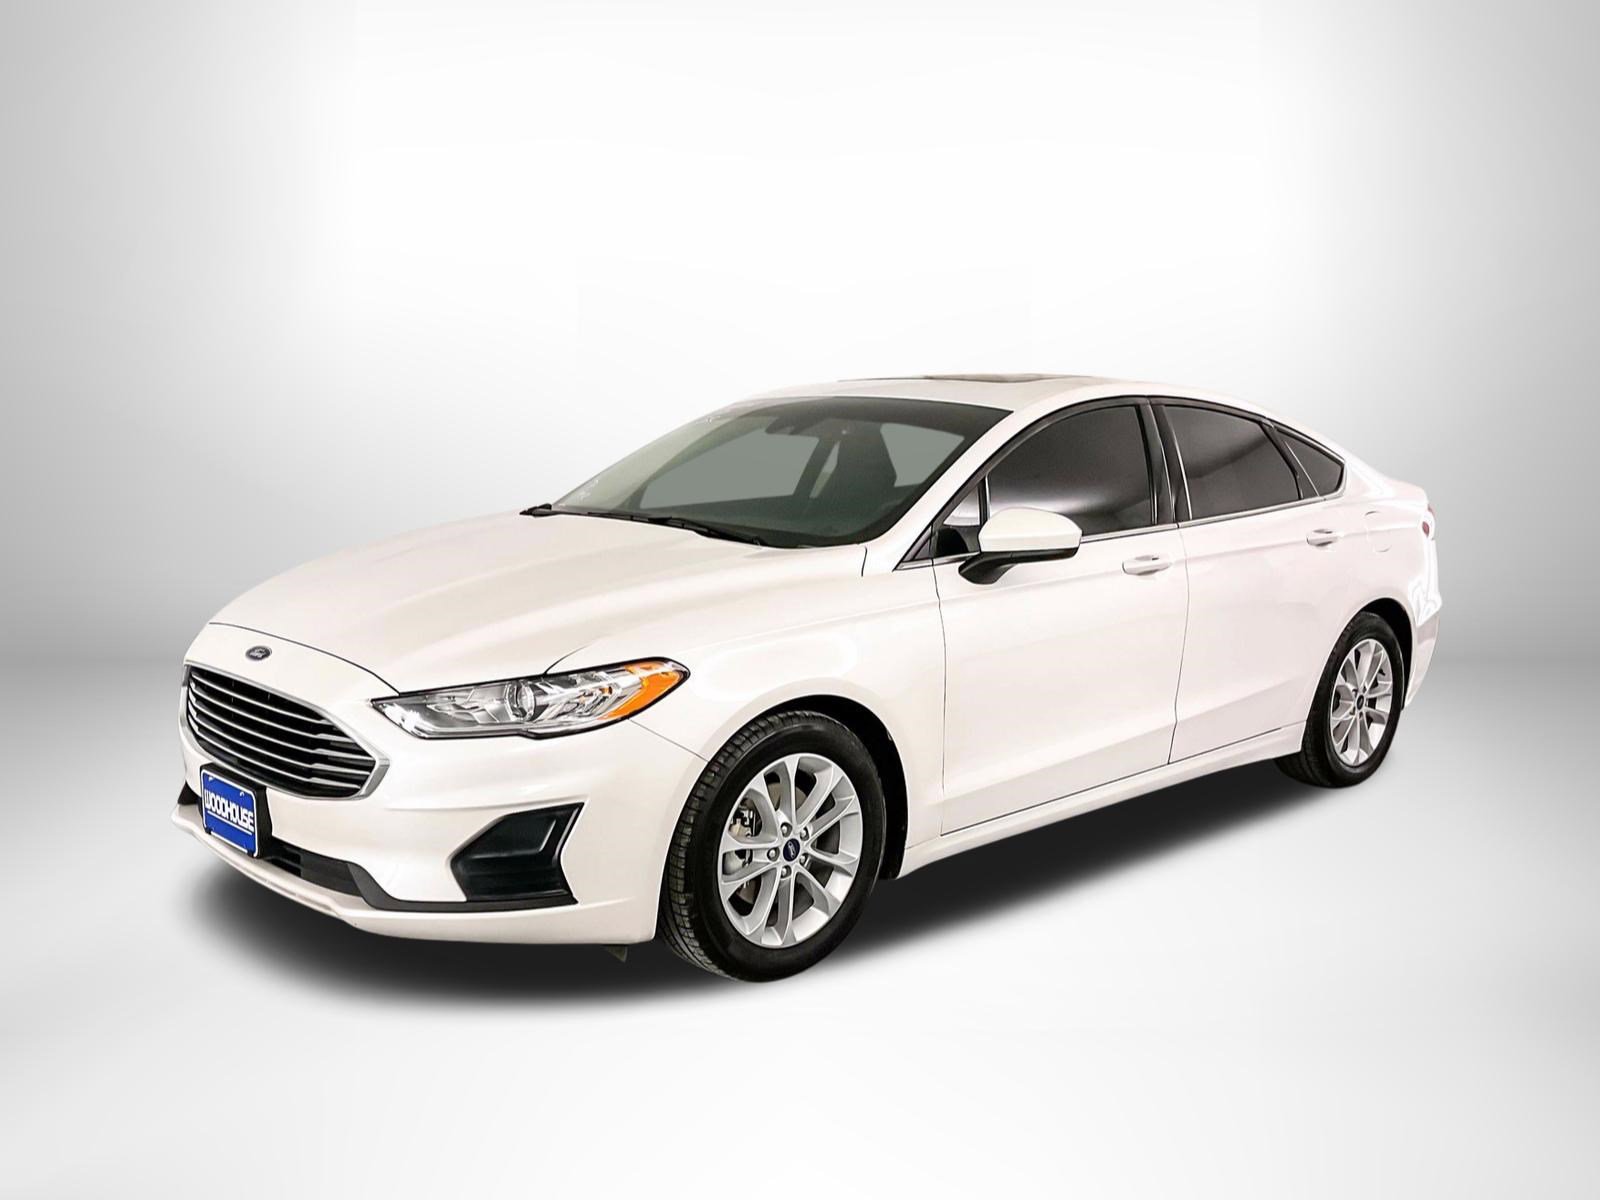 Pre-Owned 2020 Ford Fusion SE 4dr Car in Omaha #K220252D | Woodhouse